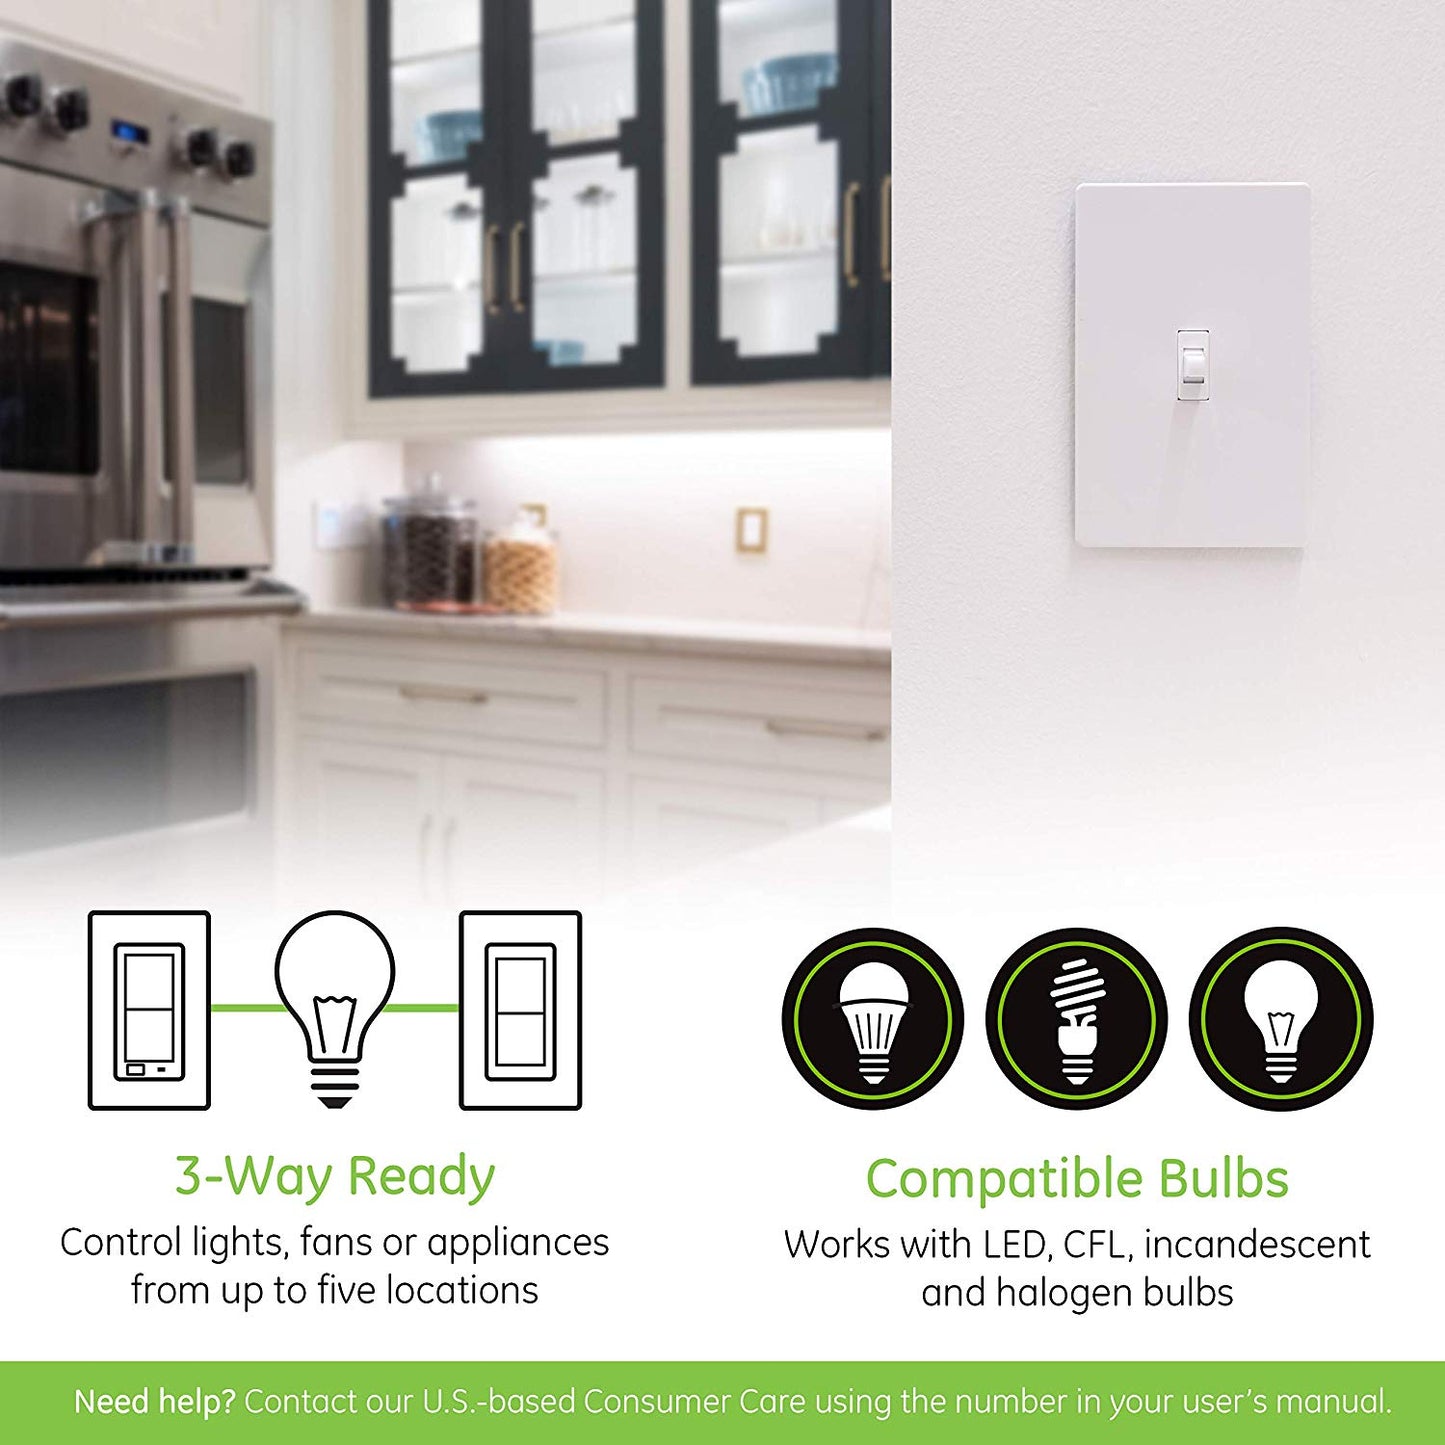 GE Enbrighten Z-Wave Plus Smart On/Off Toggle Switch With QuickFit, SimpleWire, S2, and SmartStart - 46202